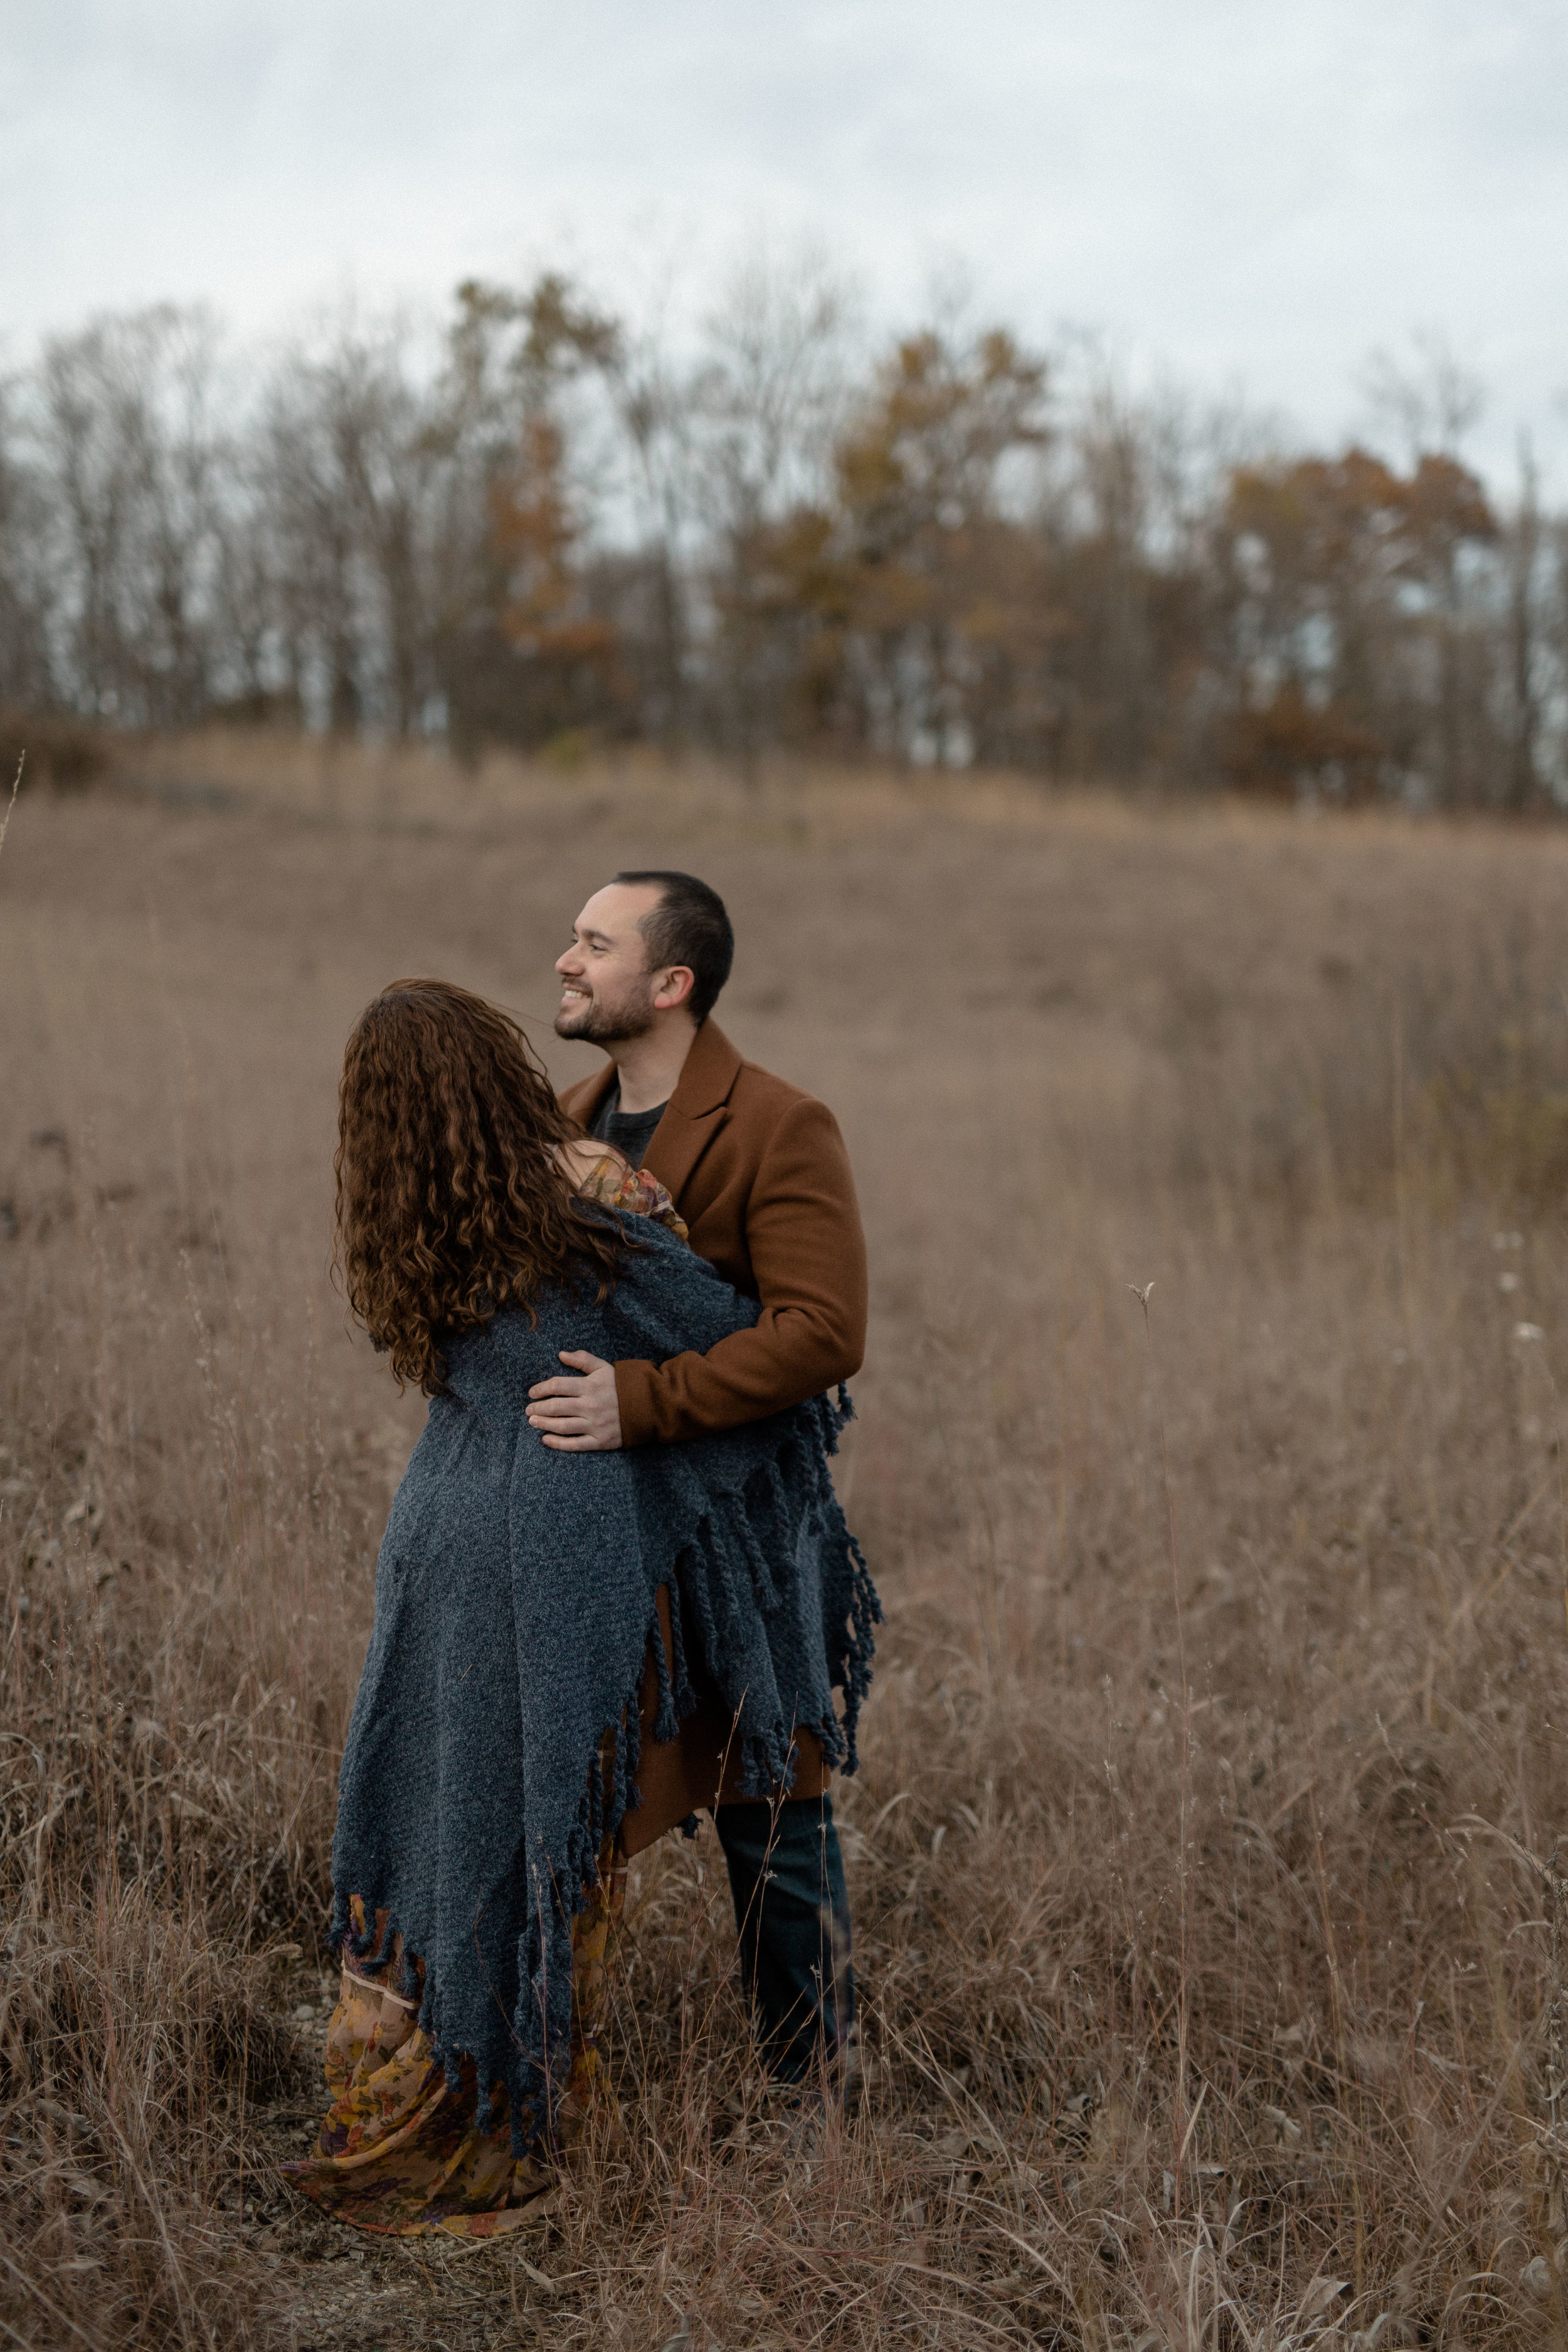 autumn engagement session inspiration. fall engagement session colors. ohio engagement photographer. bohemian floral style. moody engagement photography. sarah rose photography. i am sarah rose.